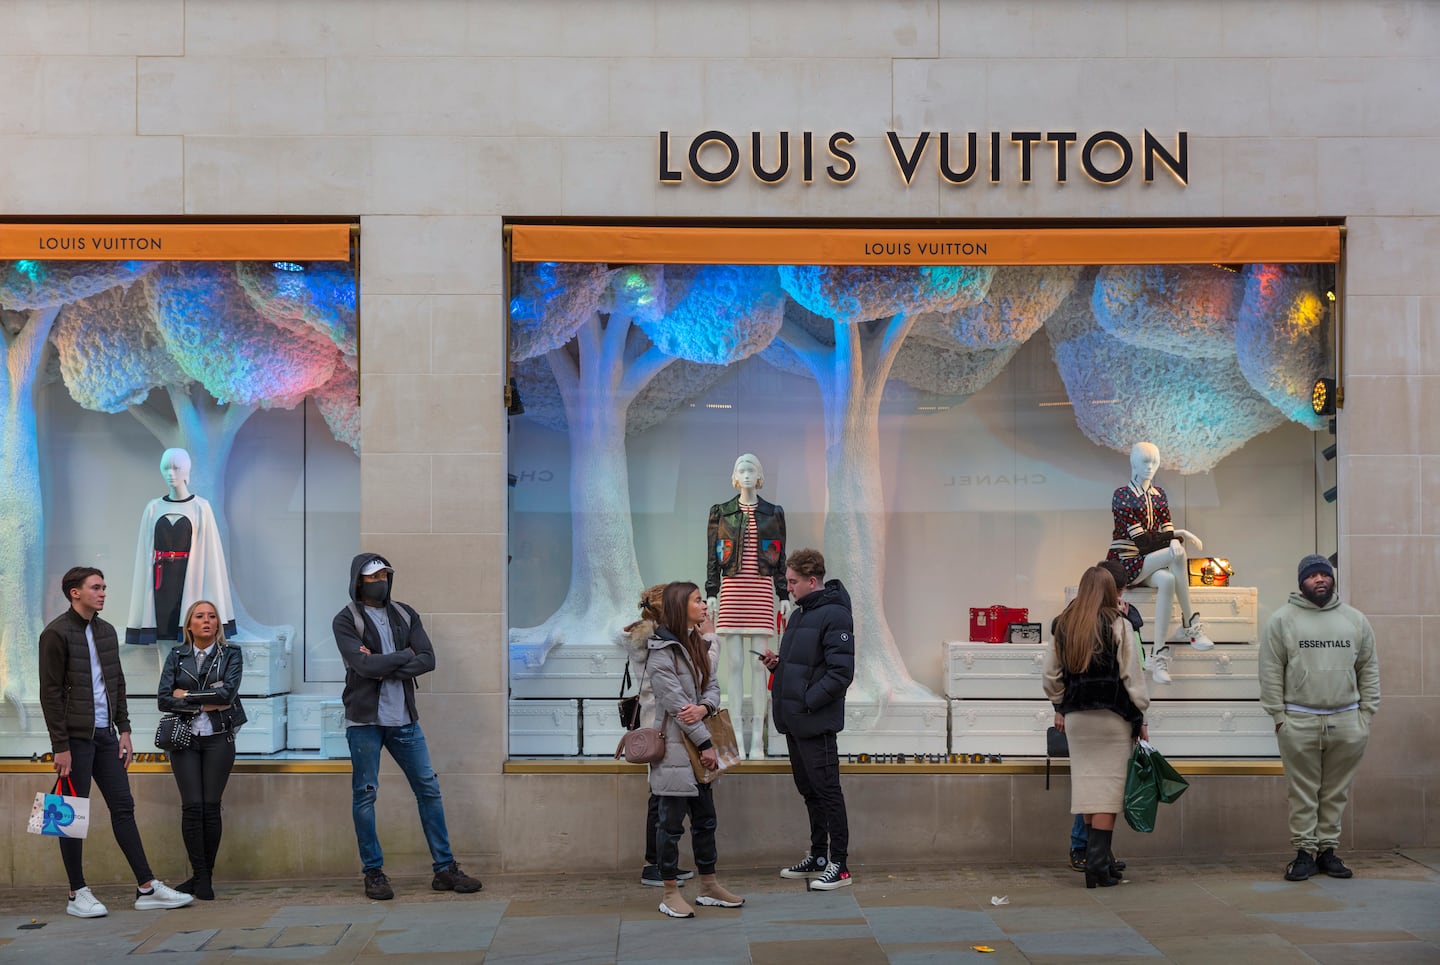 Masked shoppers queuing outside the Louis Vuitton store In London's Bond Street. Getty Images.